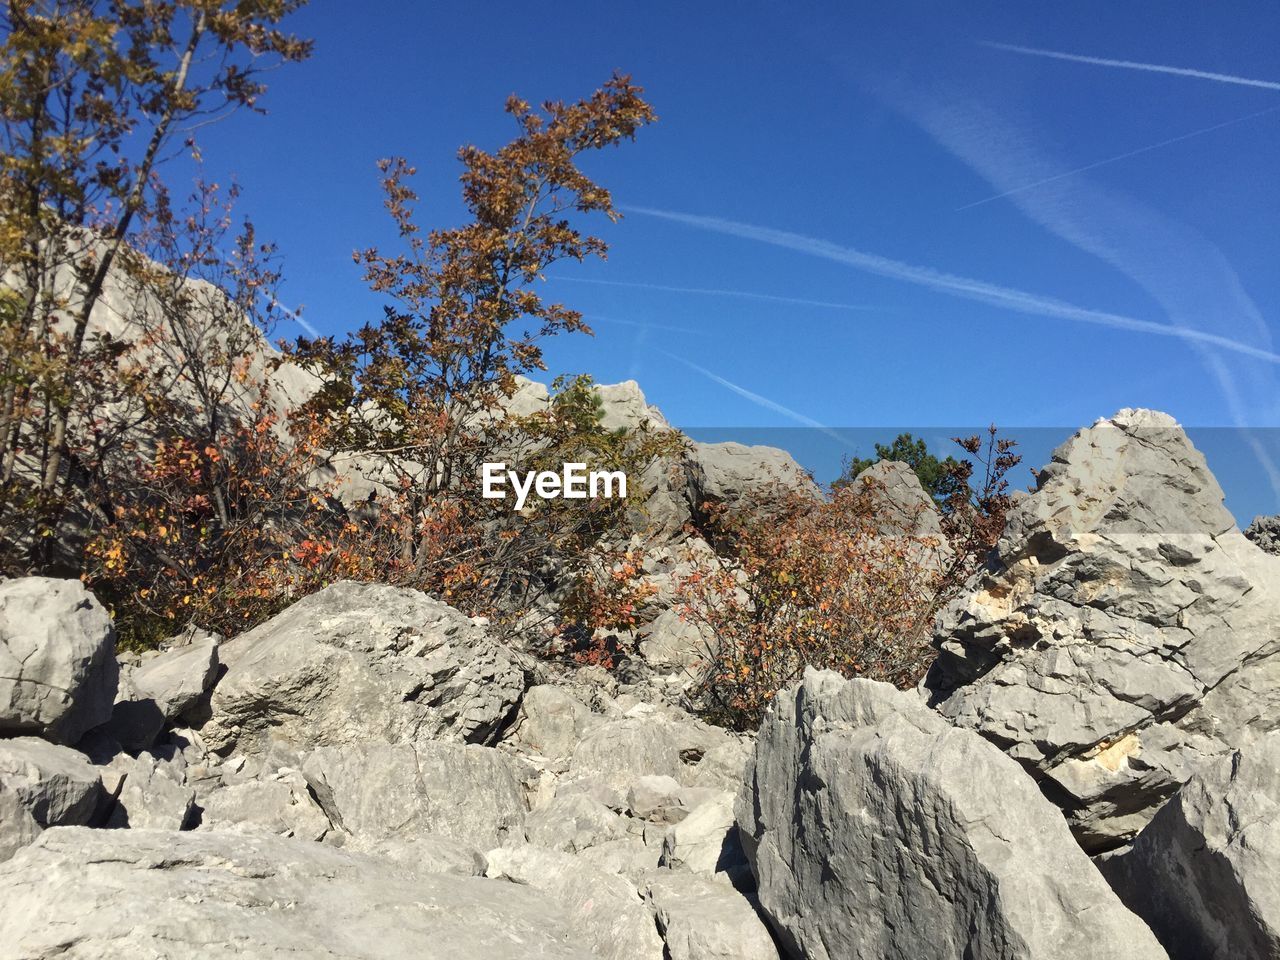 LOW ANGLE VIEW OF ROCKS AND TREES AGAINST CLEAR BLUE SKY